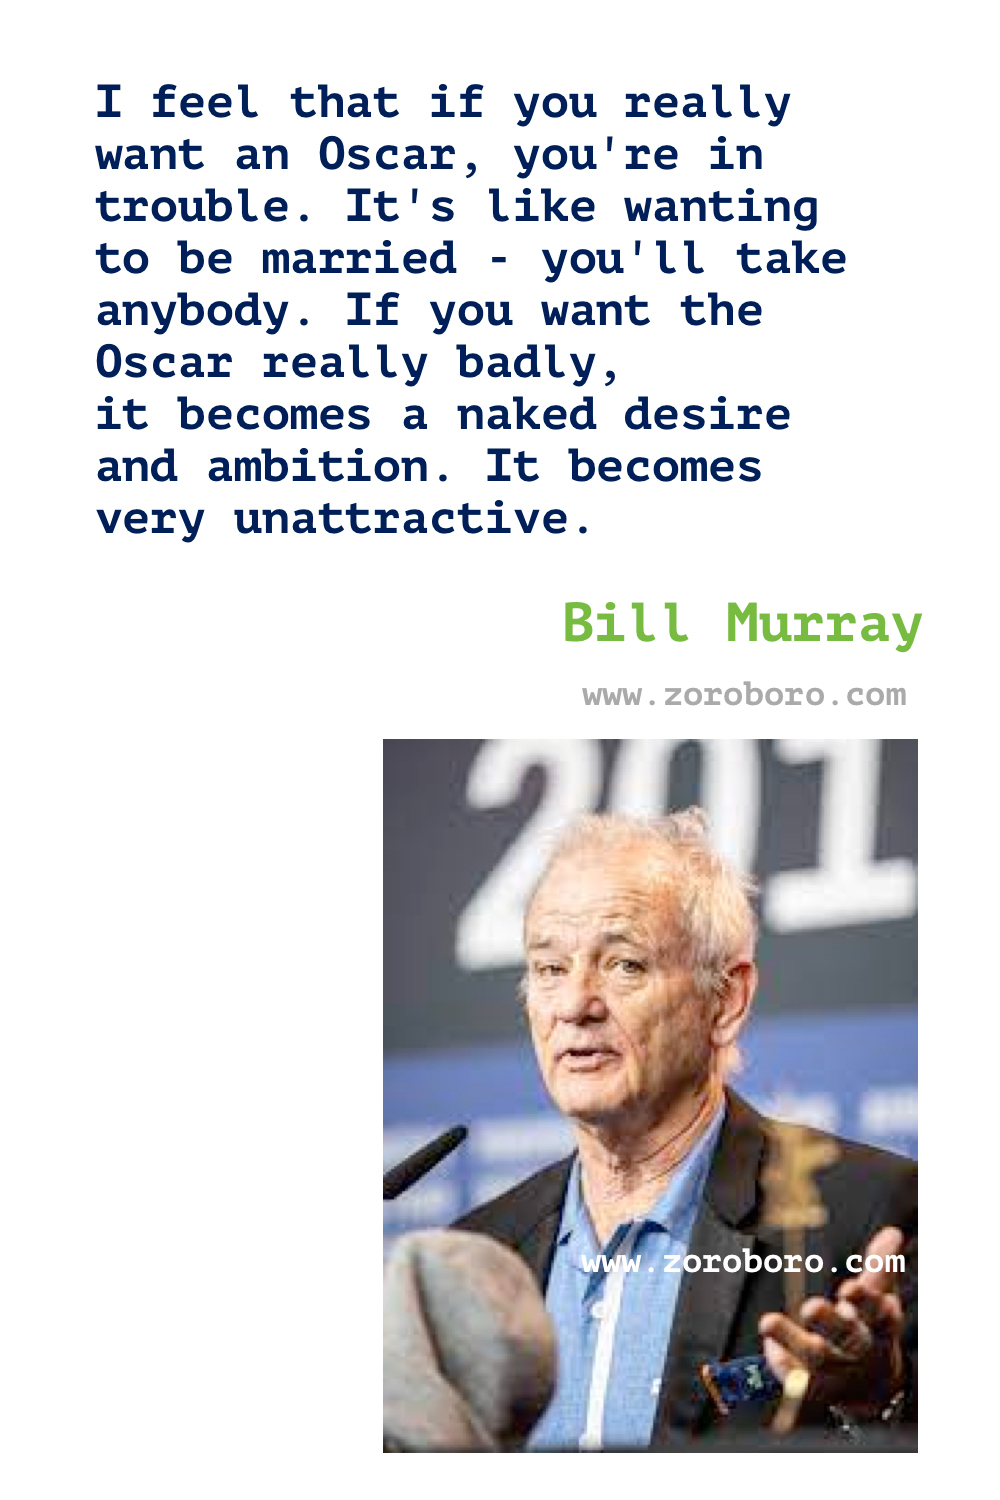 Bill Murray Quotes. Bill Murray Quote about Dogs Quote, Love Quote, Life Quote, Actor & Comedian. Bill Murray Relax Quote, Bill Murray Change Quote, Funny Bill Murray Quotes. Bill Murray Movies Quote.